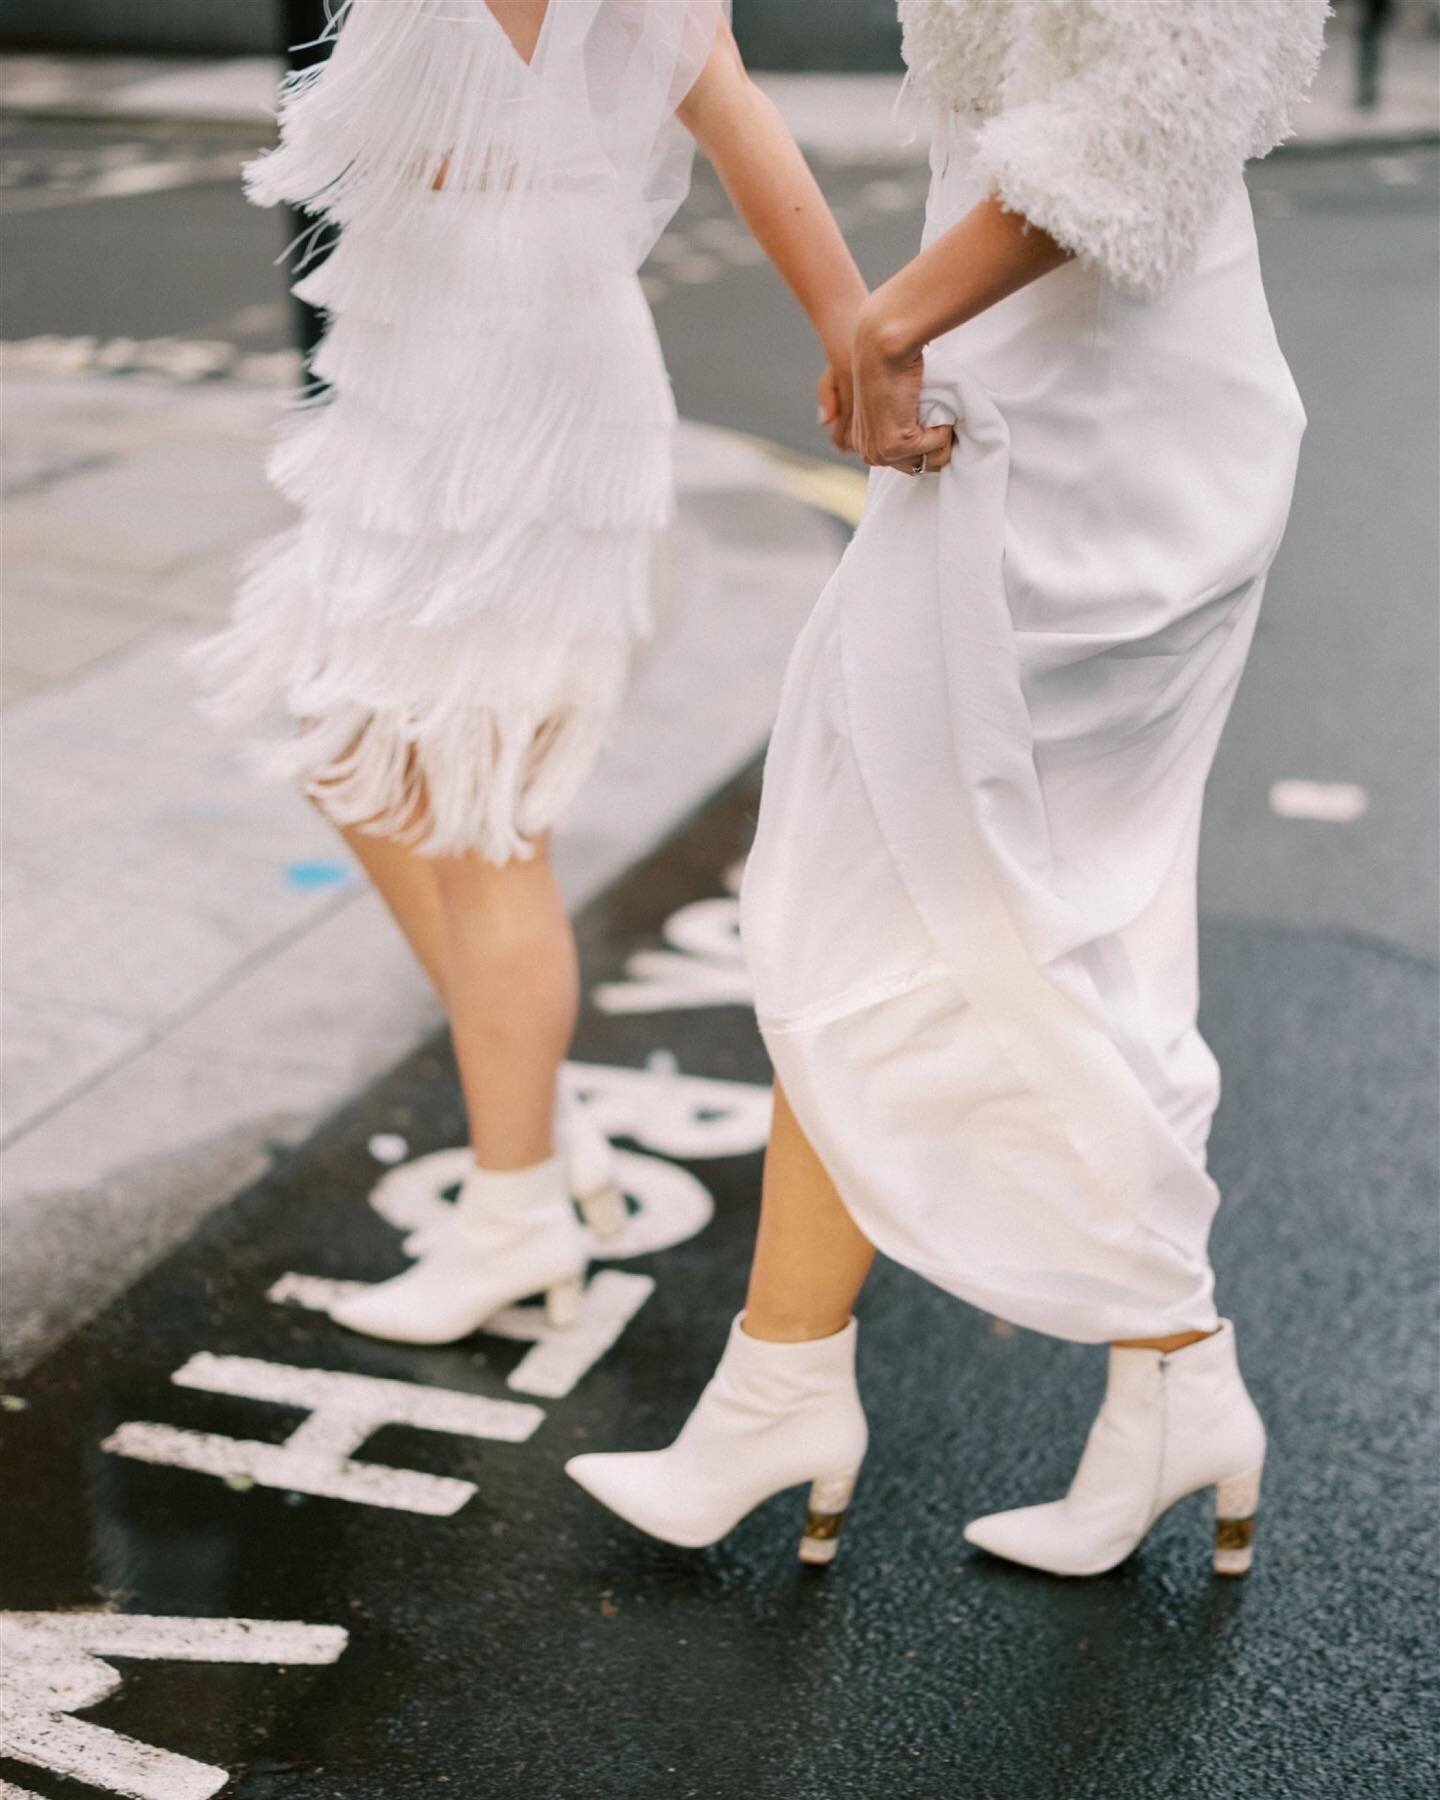 London, the perfect place to get married, come rain or shine. 

We&rsquo;ve been having some lovely consultation calls for 2023 and 2024 dates. One of the things we love hearing is how many couples want to capture more than just the beauty of the day